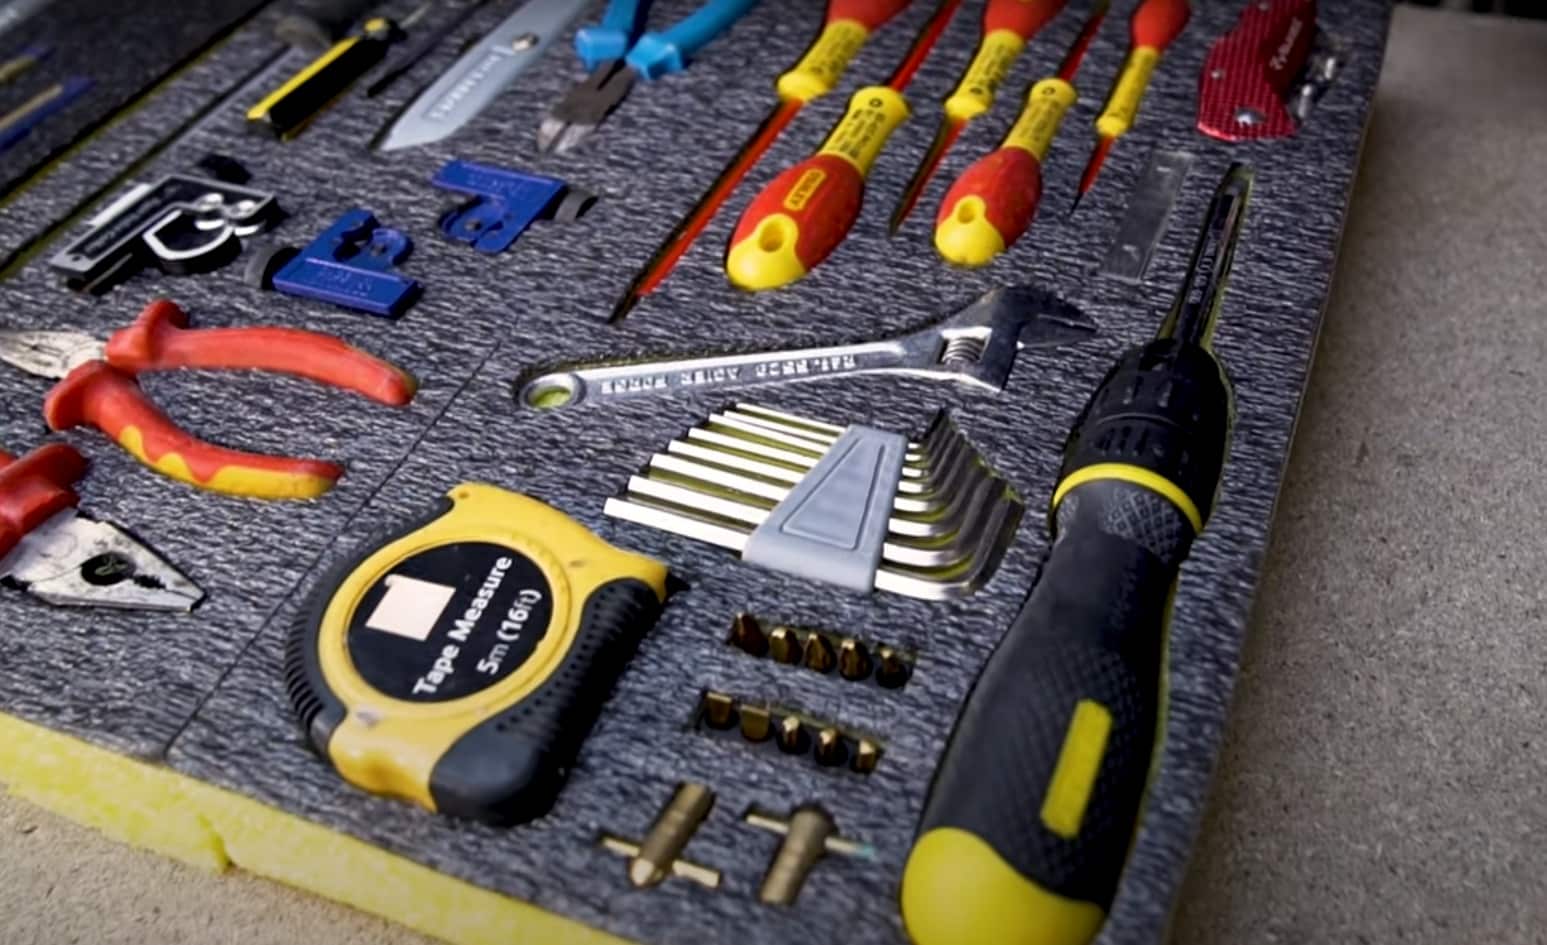 the foam layers with the tools cut neatly into them makes sure the tools are well protected and very easy to find.